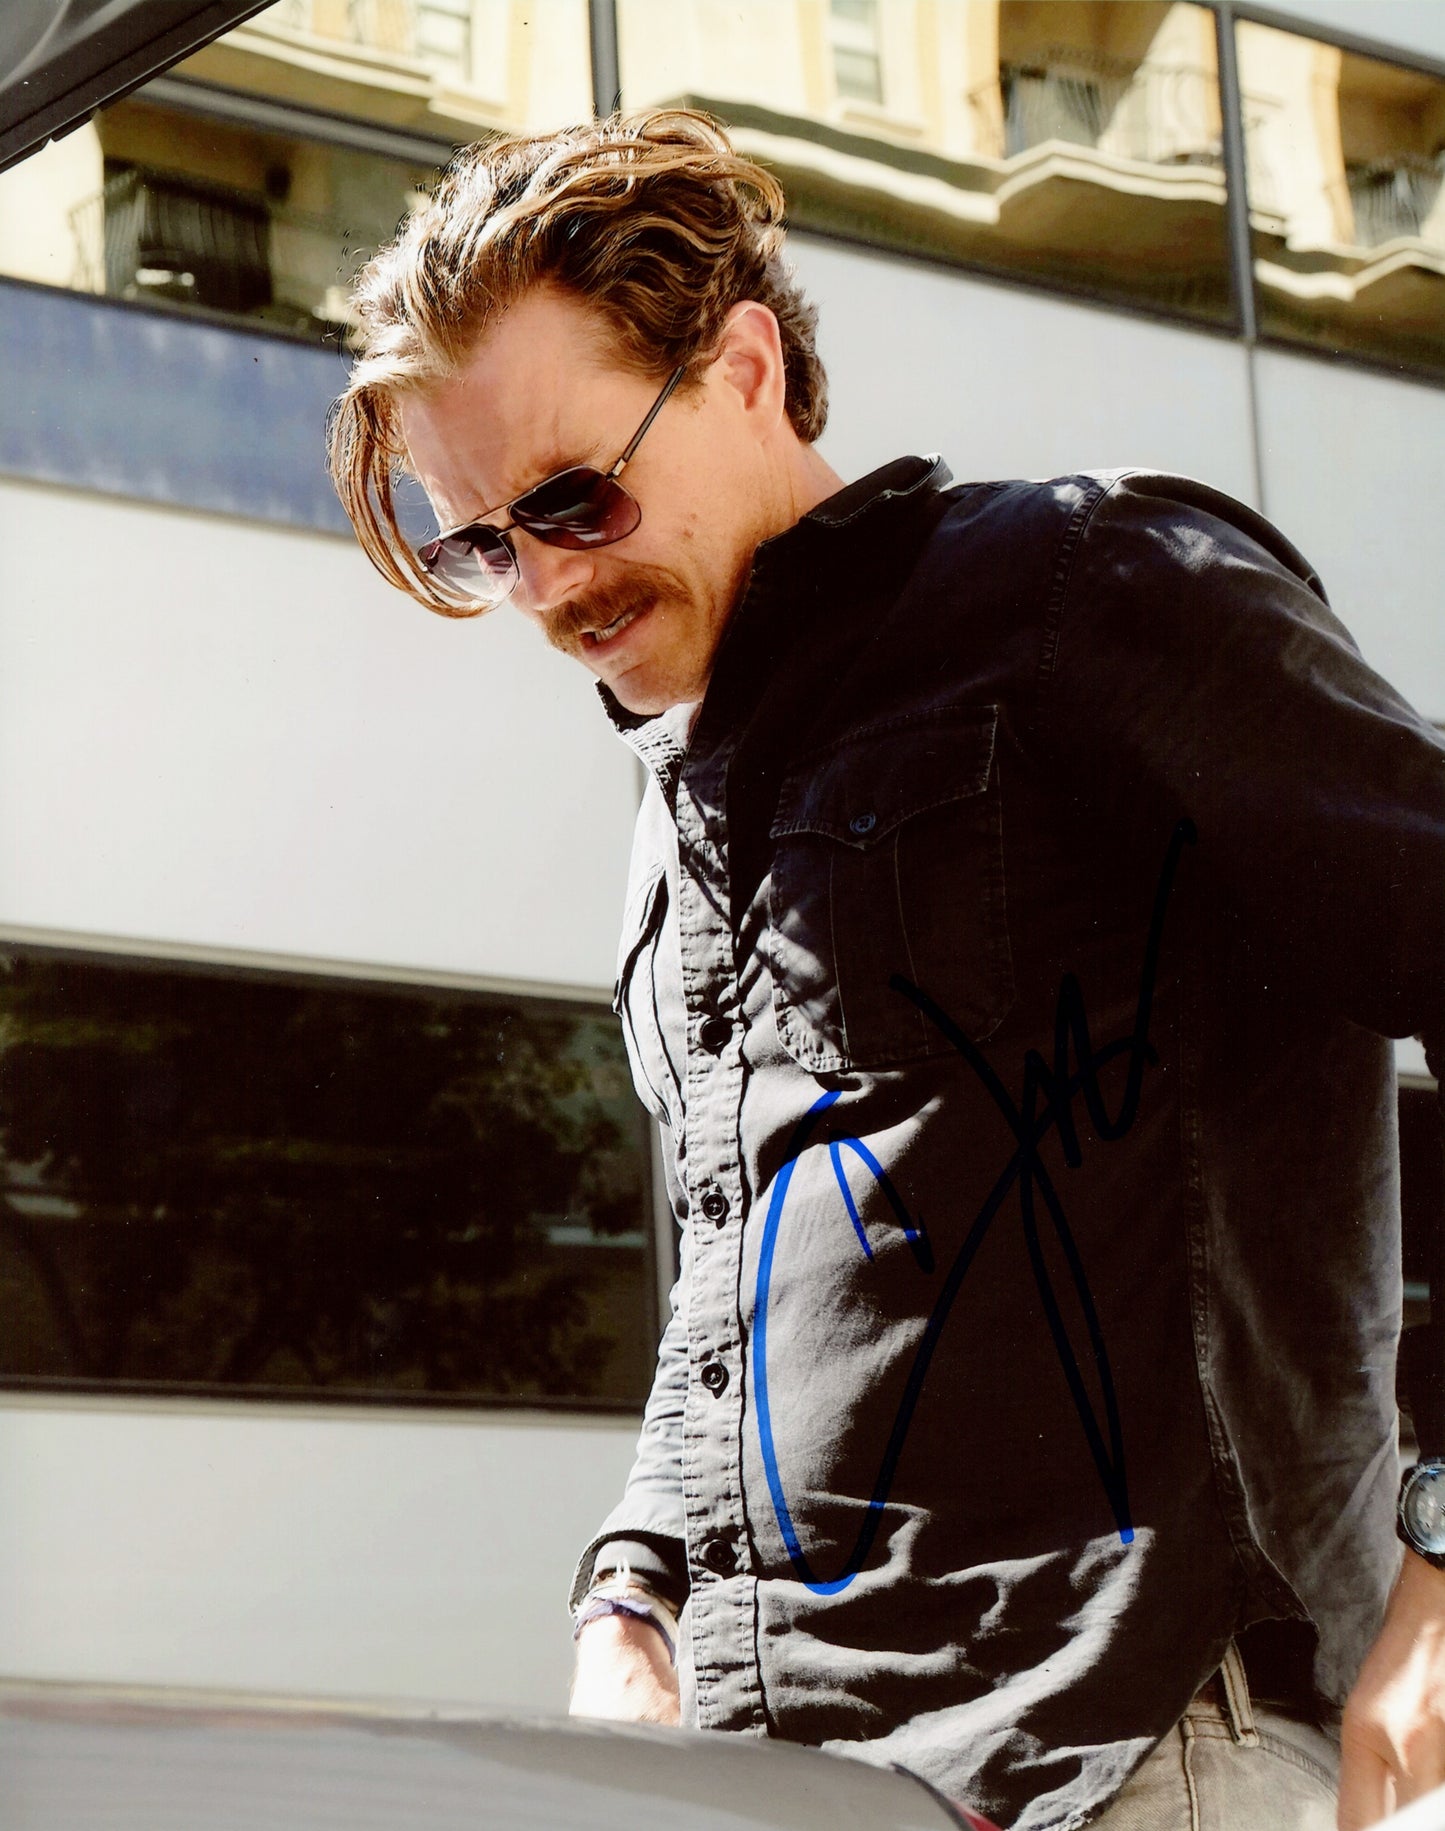 Clayne Crawford Signed 8x10 Photo - Video Proof